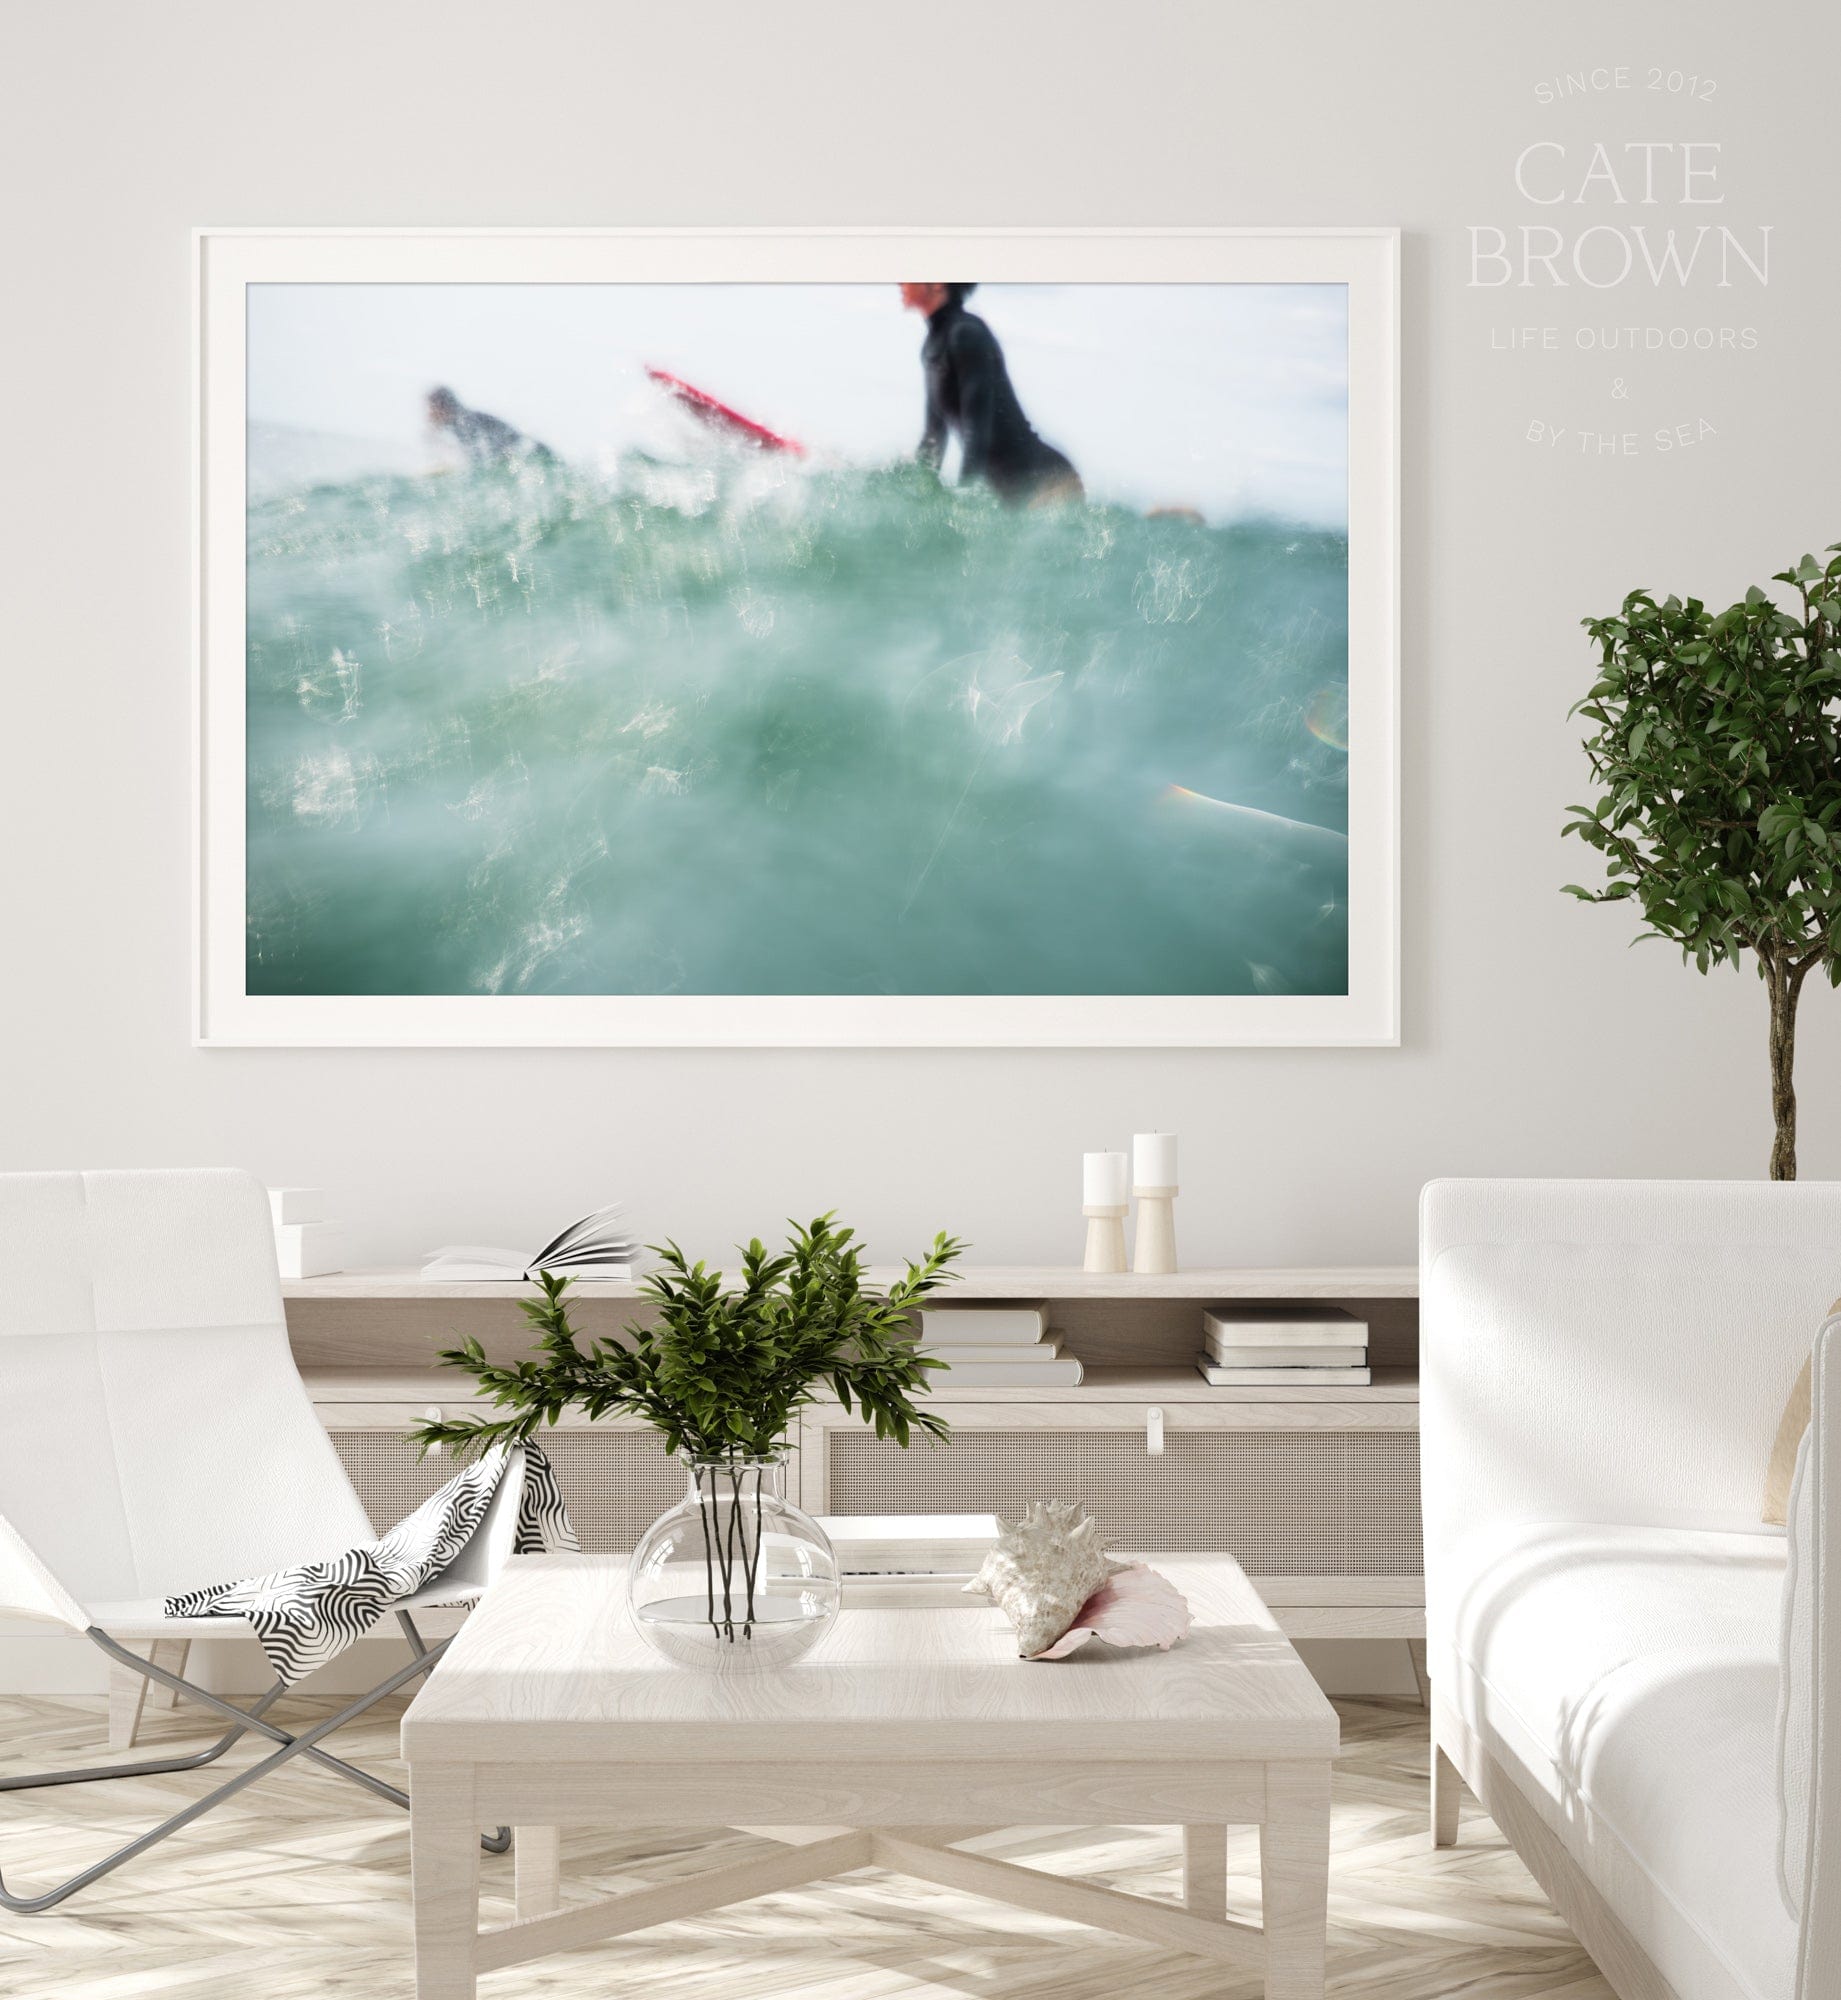 Cate Brown Photo Fine Art Print / 16"x24" / White Paulette Sparkles  //  Surf Photography Made to Order Ocean Fine Art